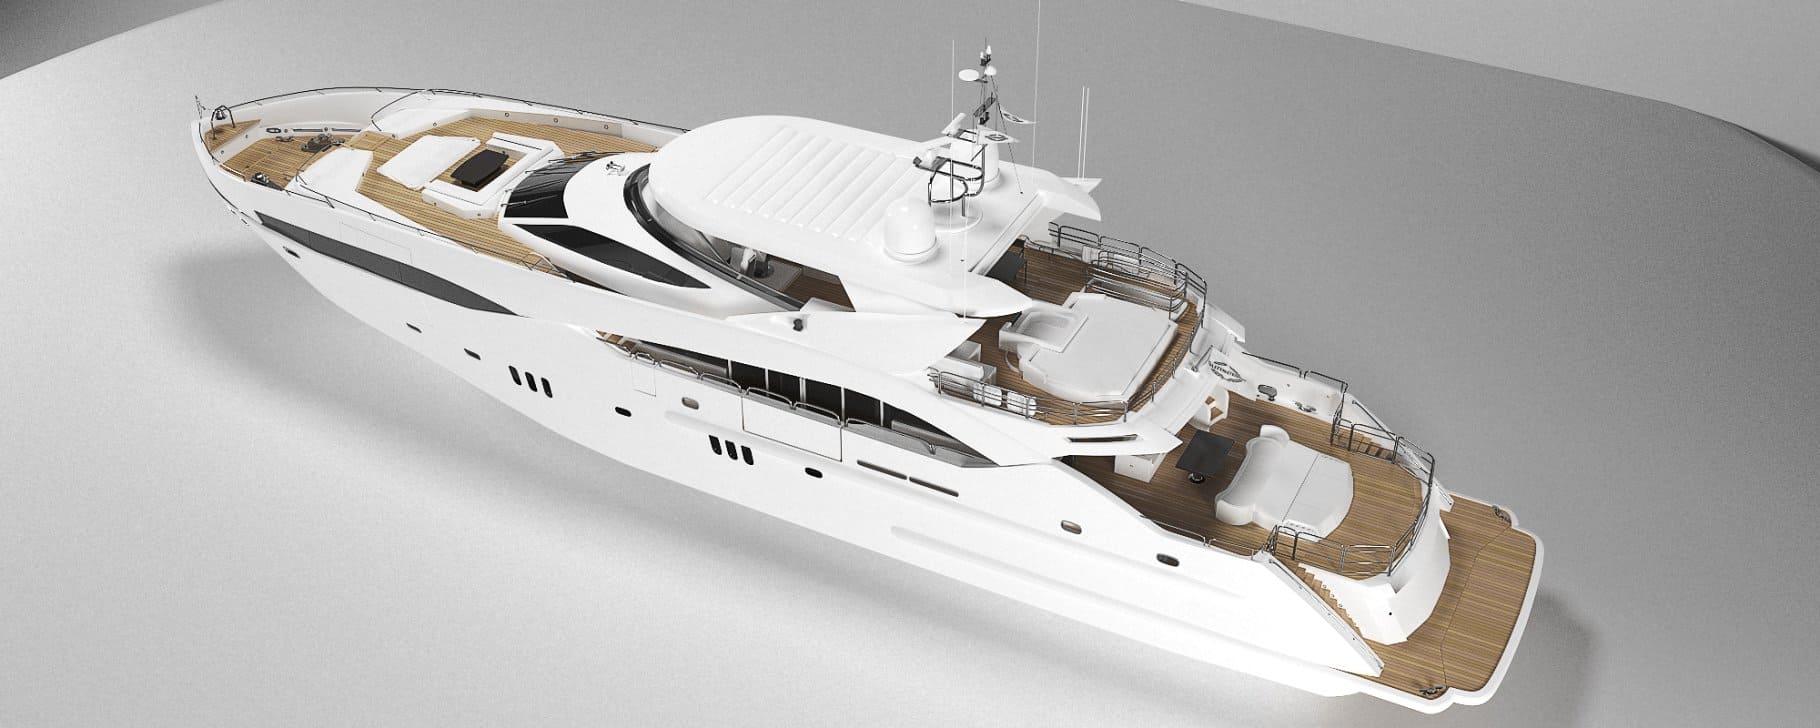 Angled top view of the Sunseeker predator 130 white Superyacht model in the graphics editor.